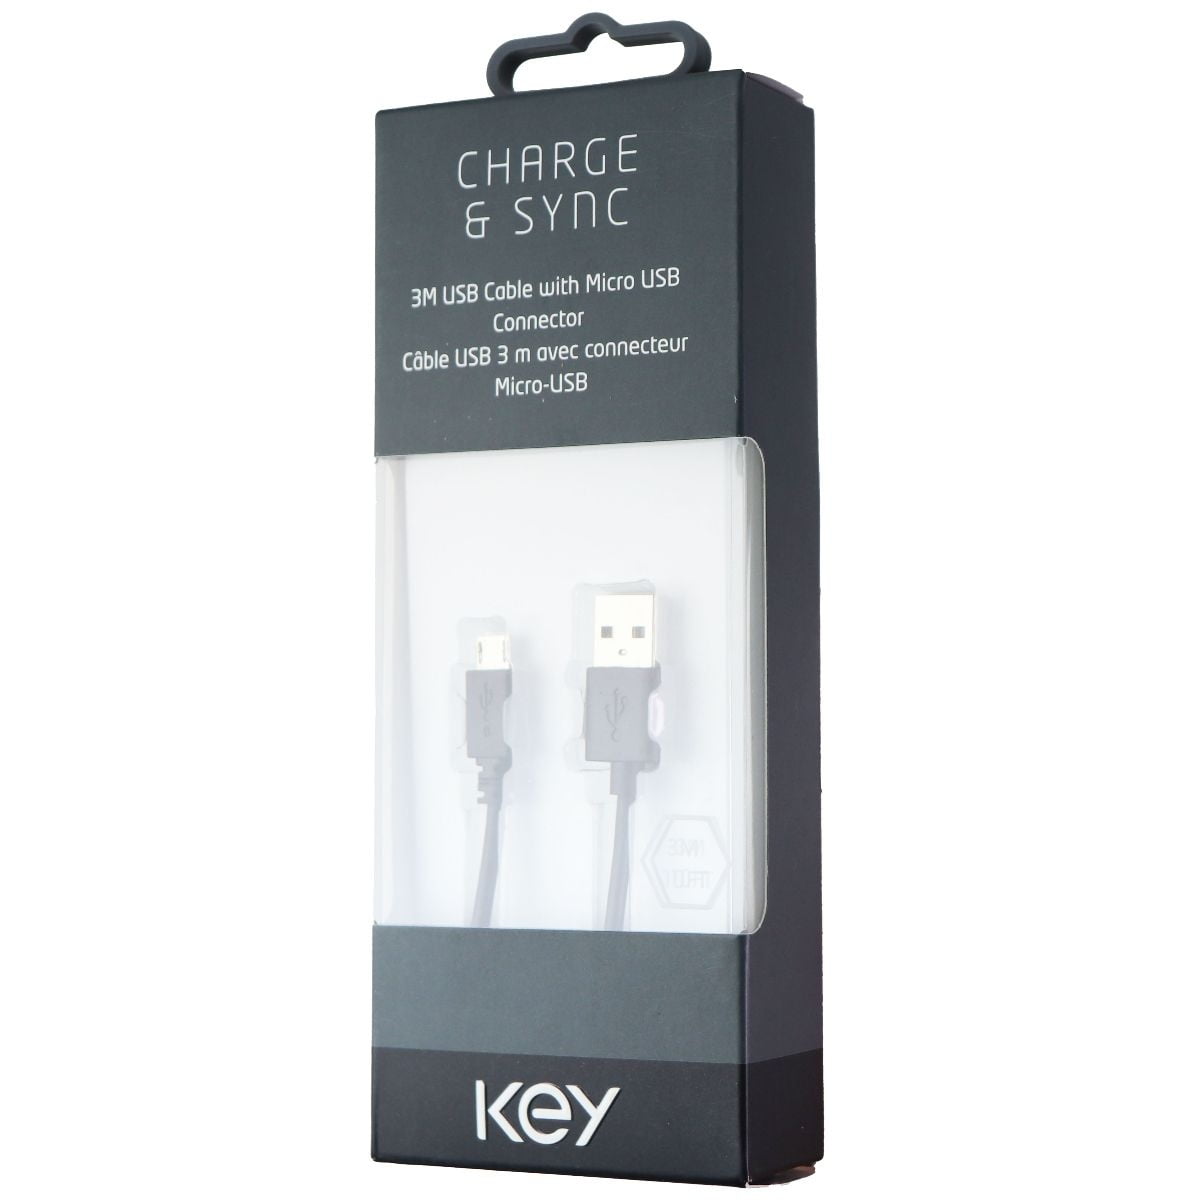 åbning at retfærdiggøre Boost Key ( CDSM30058BLK ) 10Ft Charge & Sync USB Cable for Micro USB Devices -  Black - Walmart.com